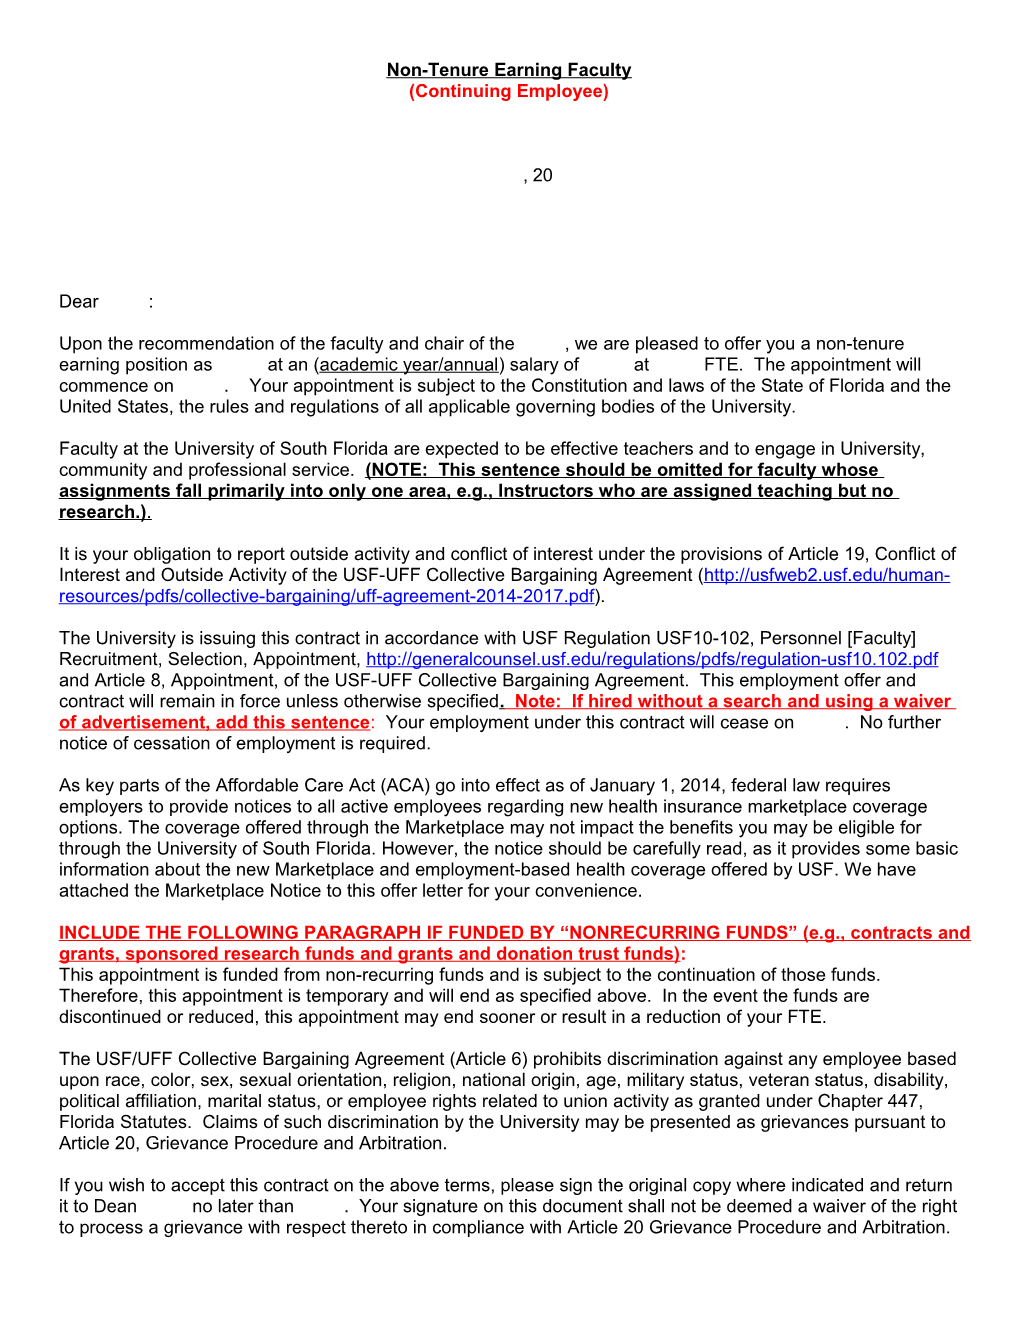 Standard Letter of Offer to Non-Tenure Earning Faculty